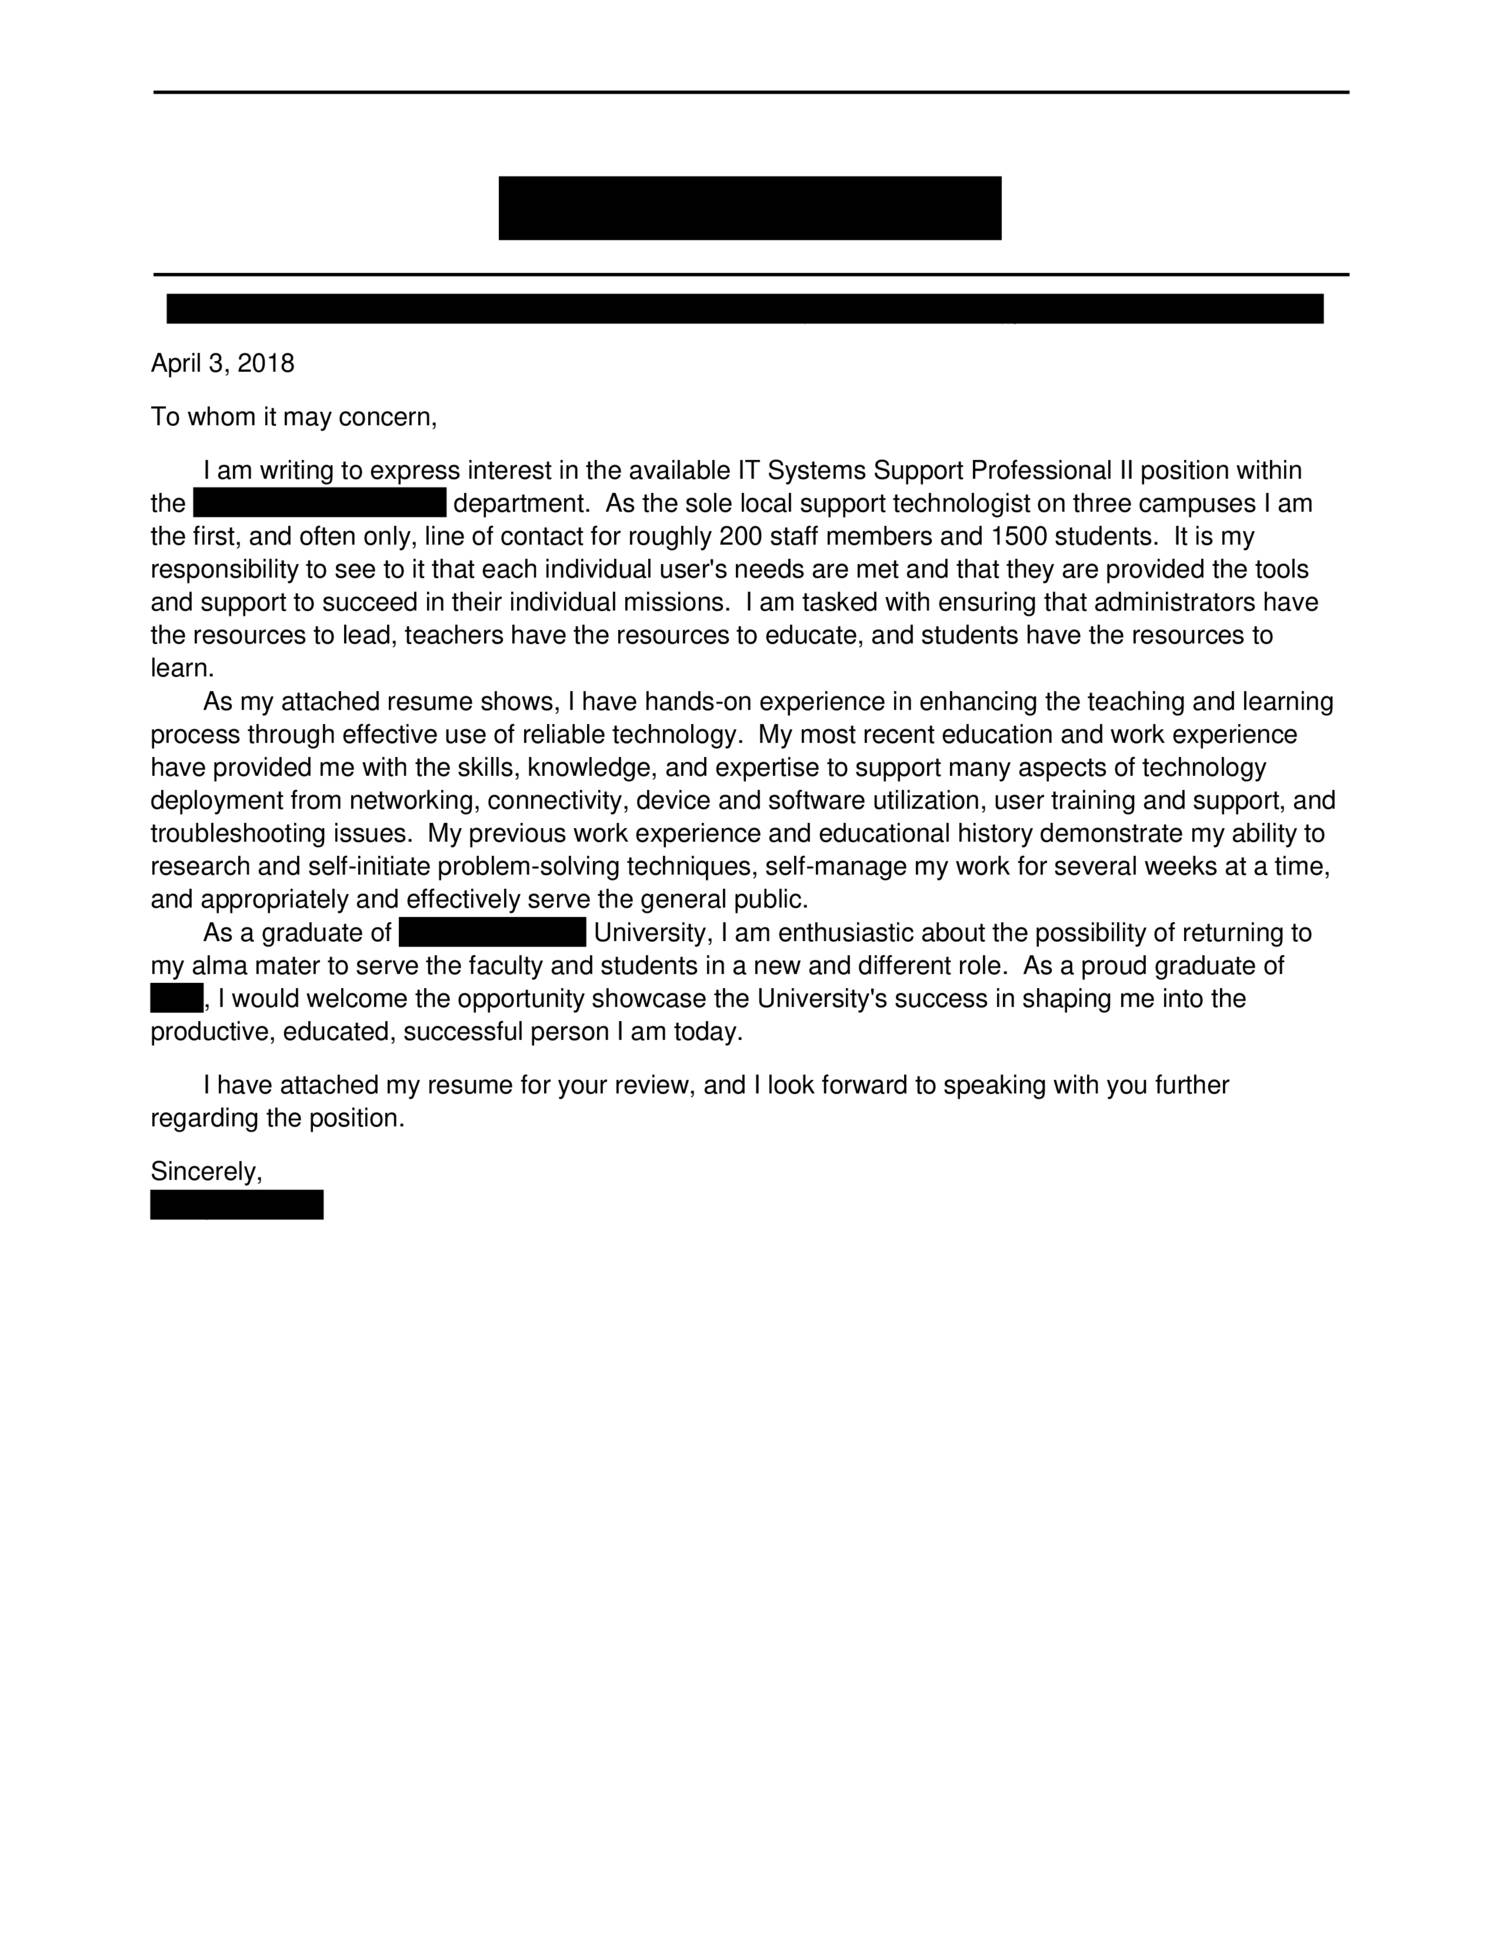 consulting cover letter reddit